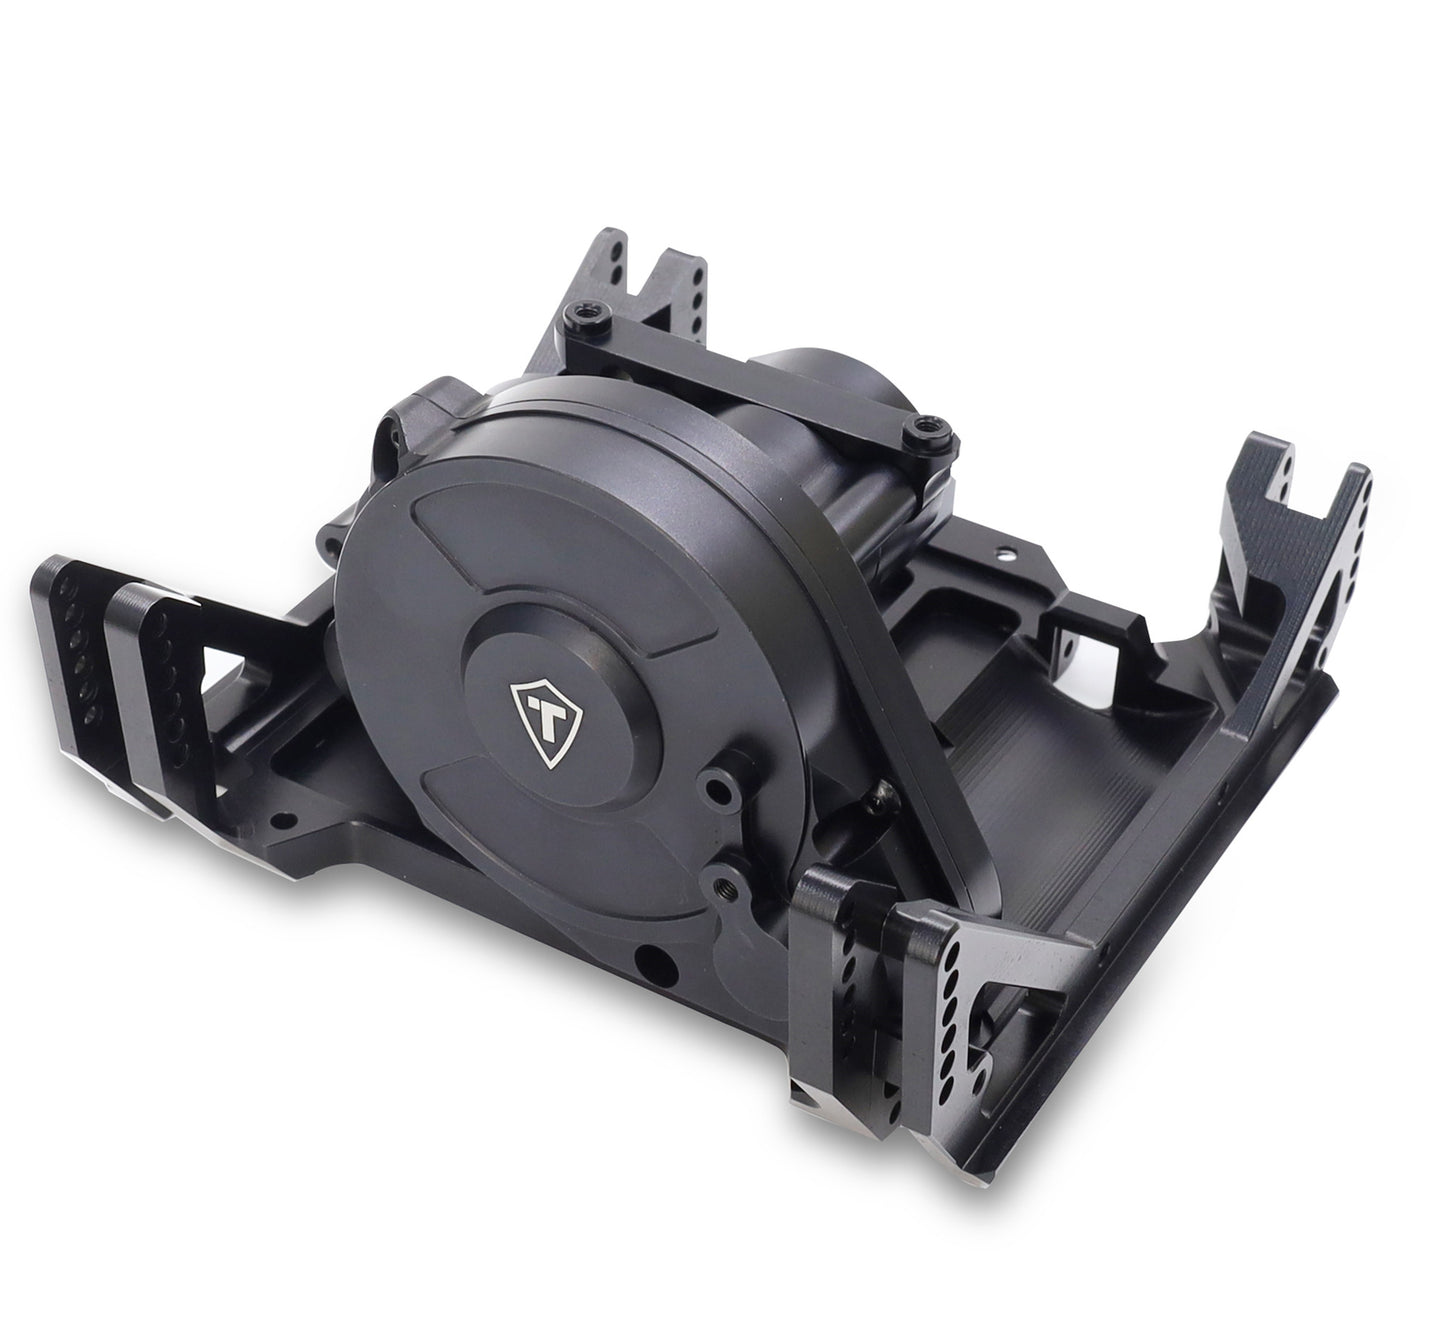 TREAL Ryft Transmission Gearbox W/Motor Mount, Aluminum 7075 CNC Machined Trans Case Set for 1/10 Axial RBX10 Ryft